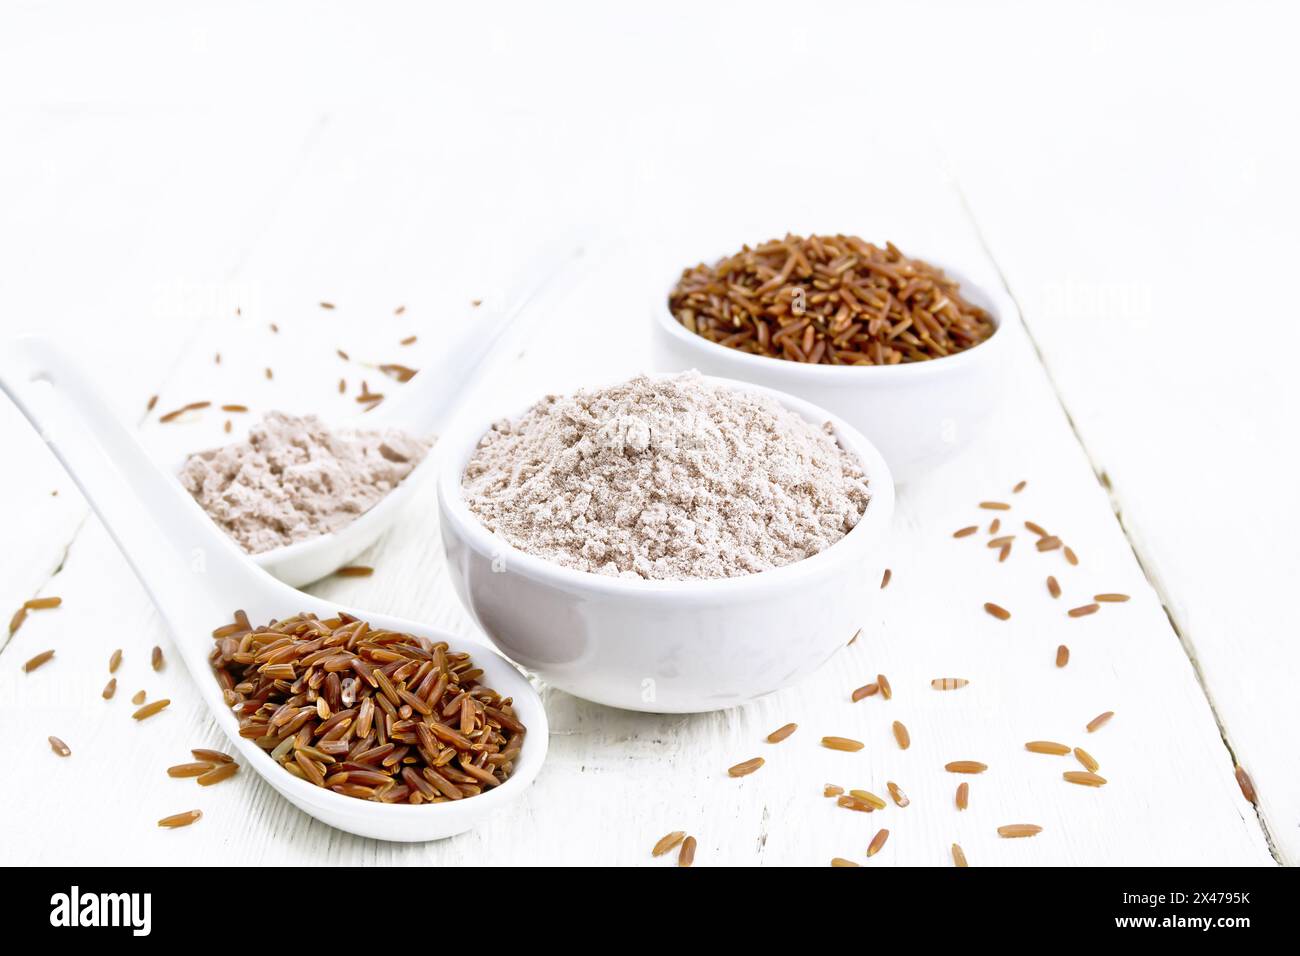 Red rice flour in bowl and spoon, cereal in spoon, bowl on wooden board background Stock Photo